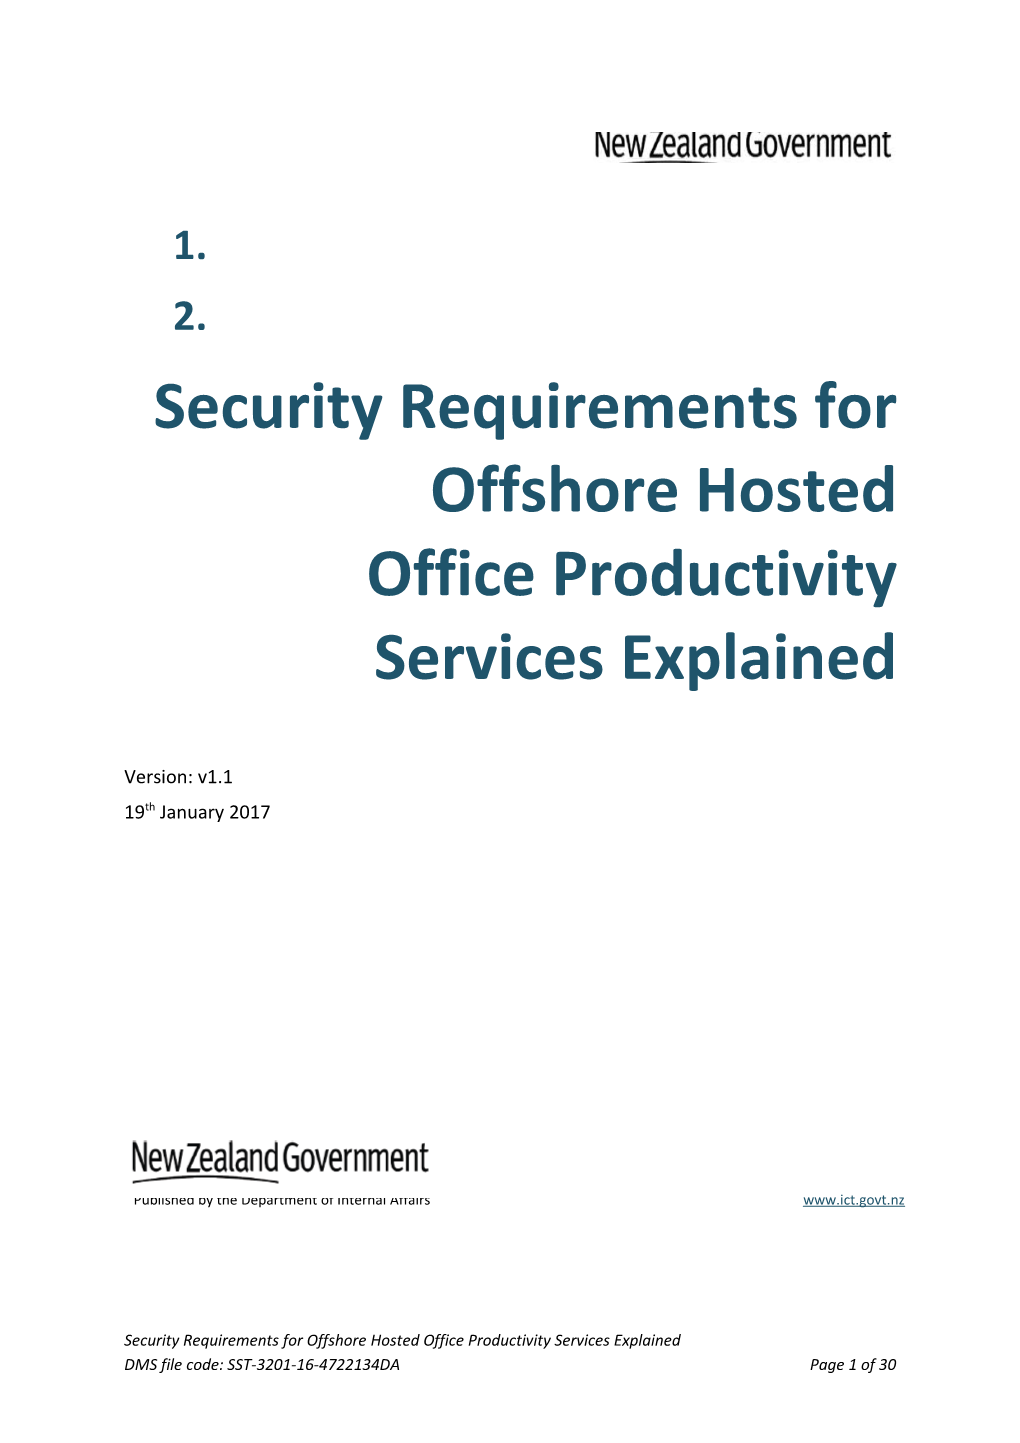 NZ Government Security Requirements for Offshore Hosted Office Productivity Services